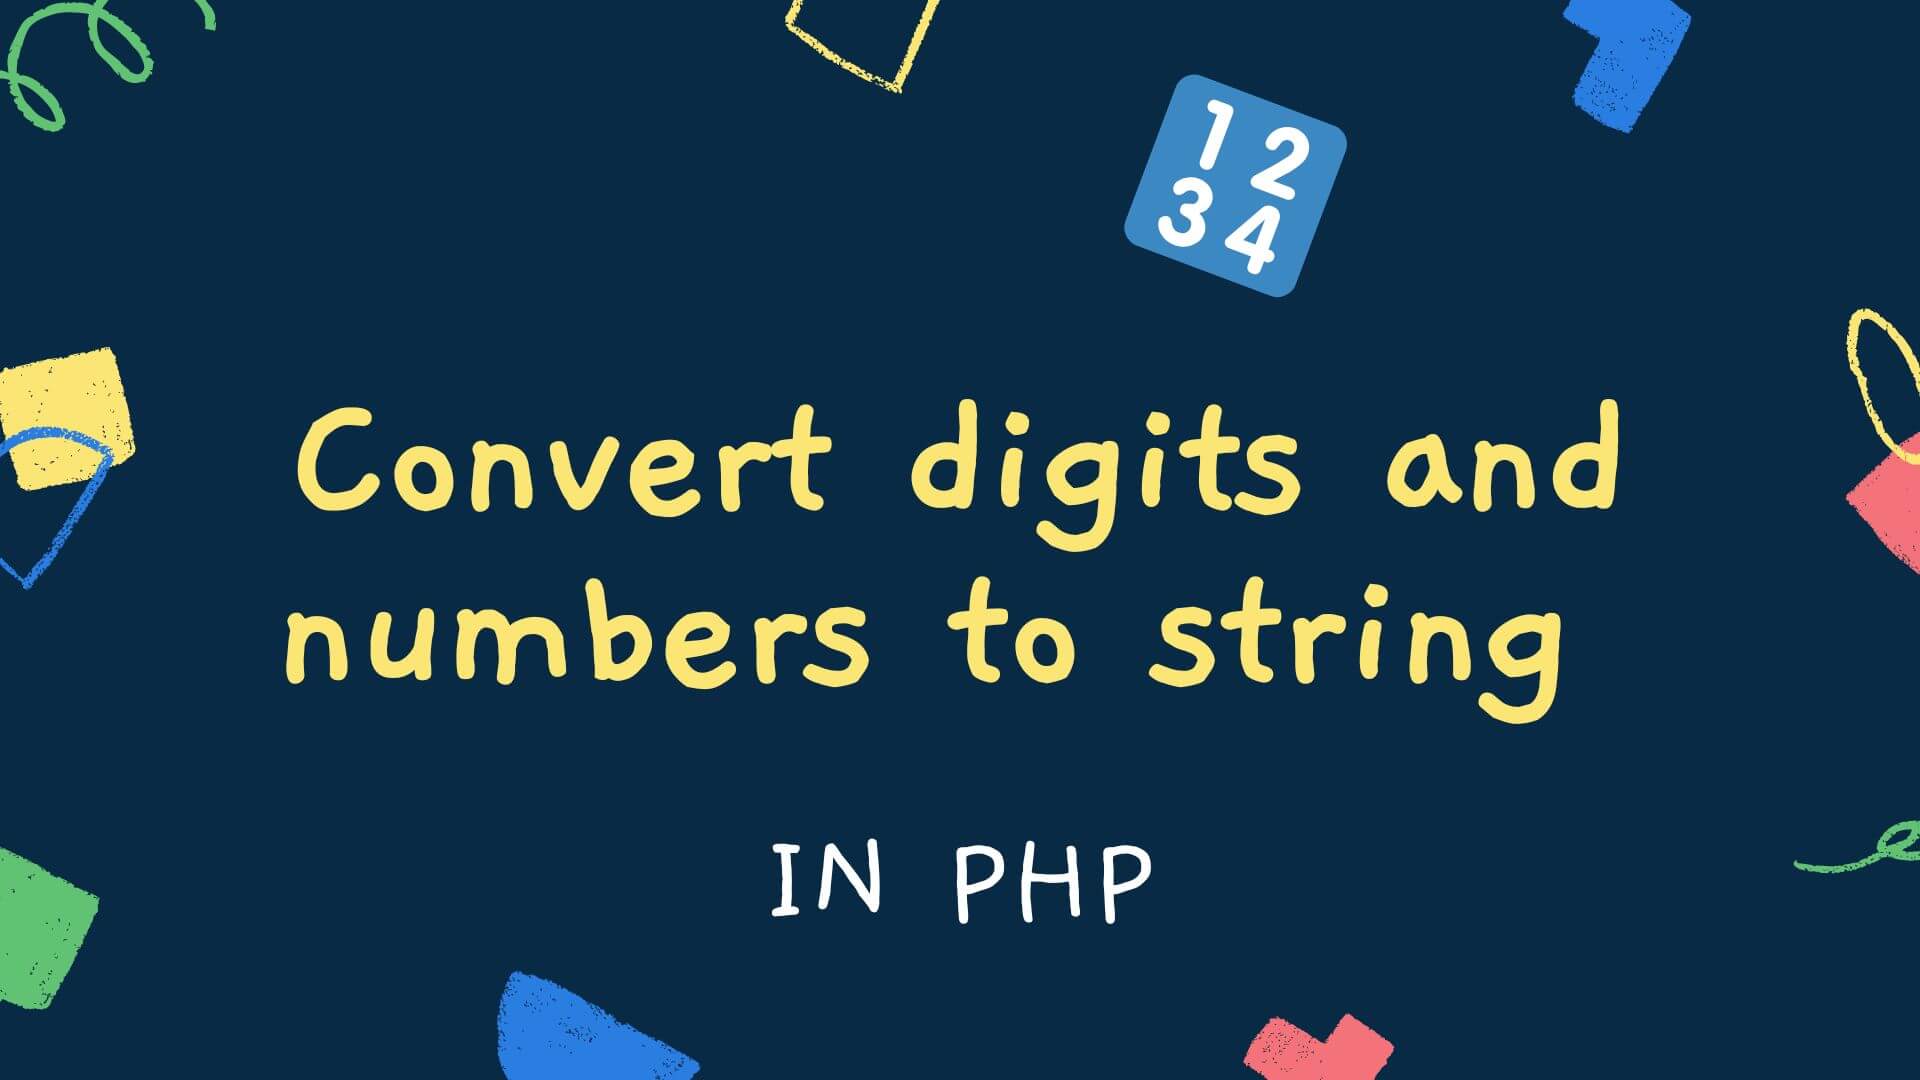 How to convert digits and numbers to strings in PHP